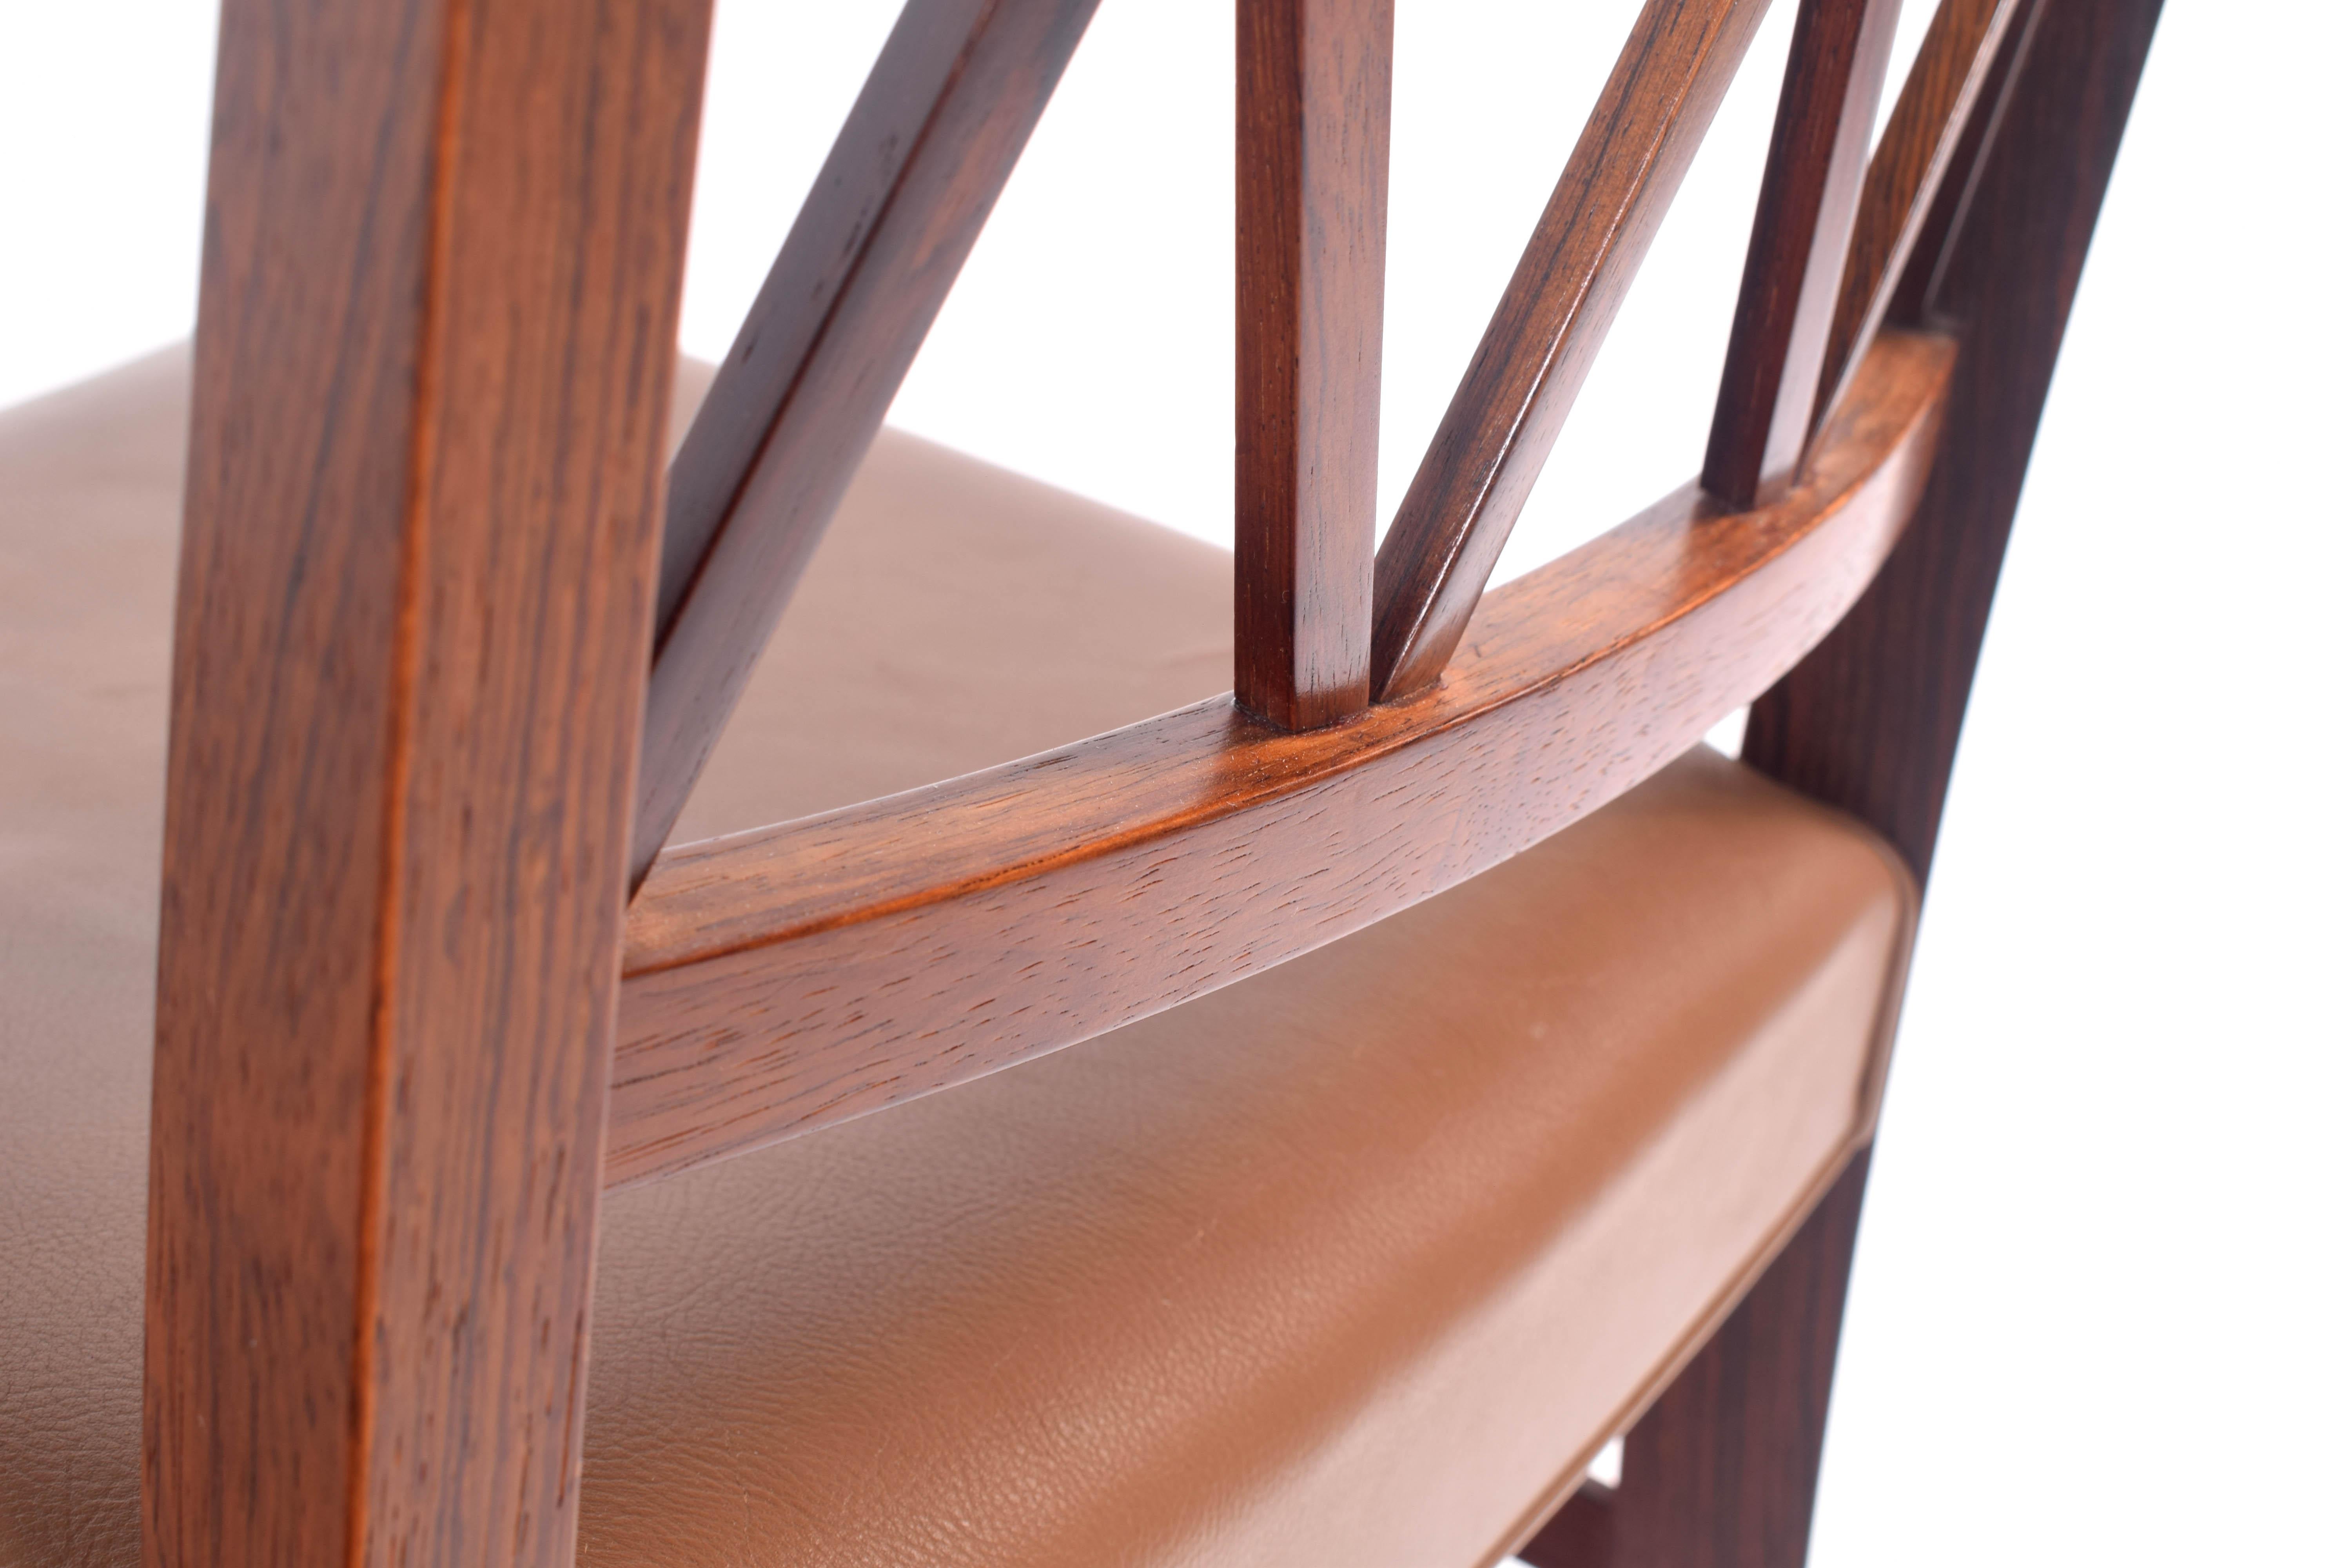 Ole Wanscher Slagelse Rosewood Dining Chairs 7